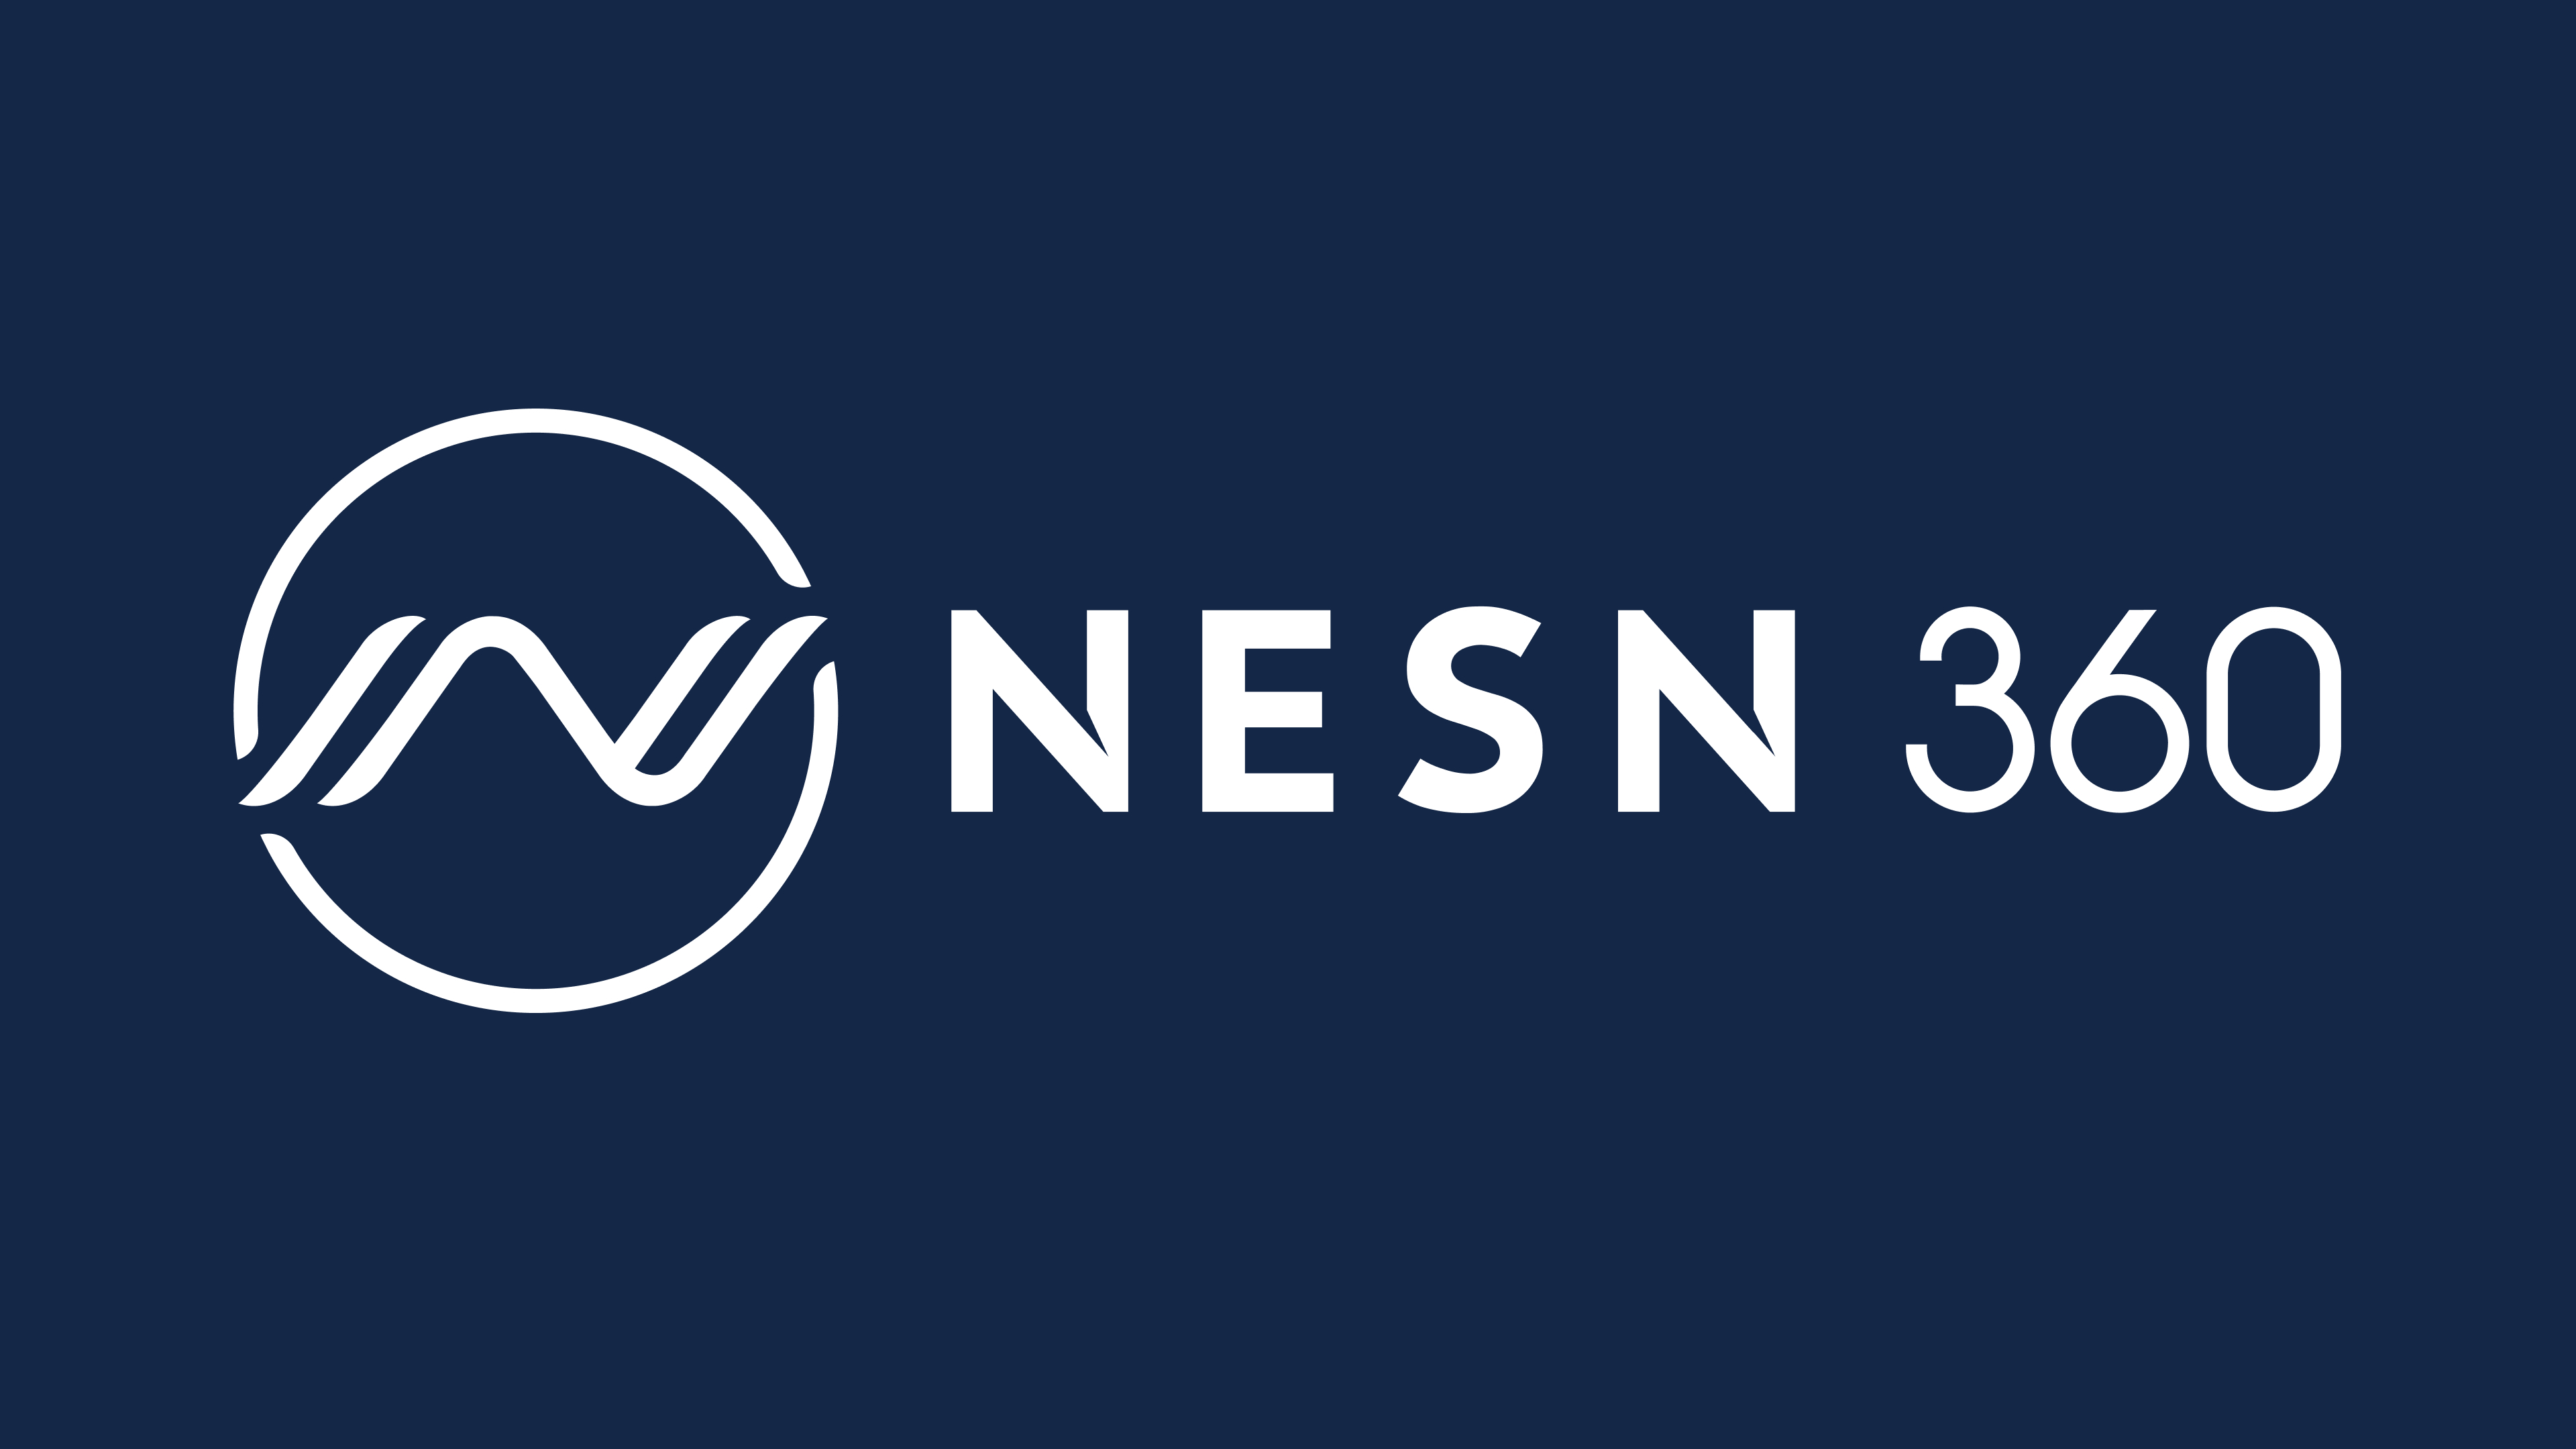 NESN Becomes First RSN To Launch Direct-To-Consumer Service With Introduction Of NESN 360